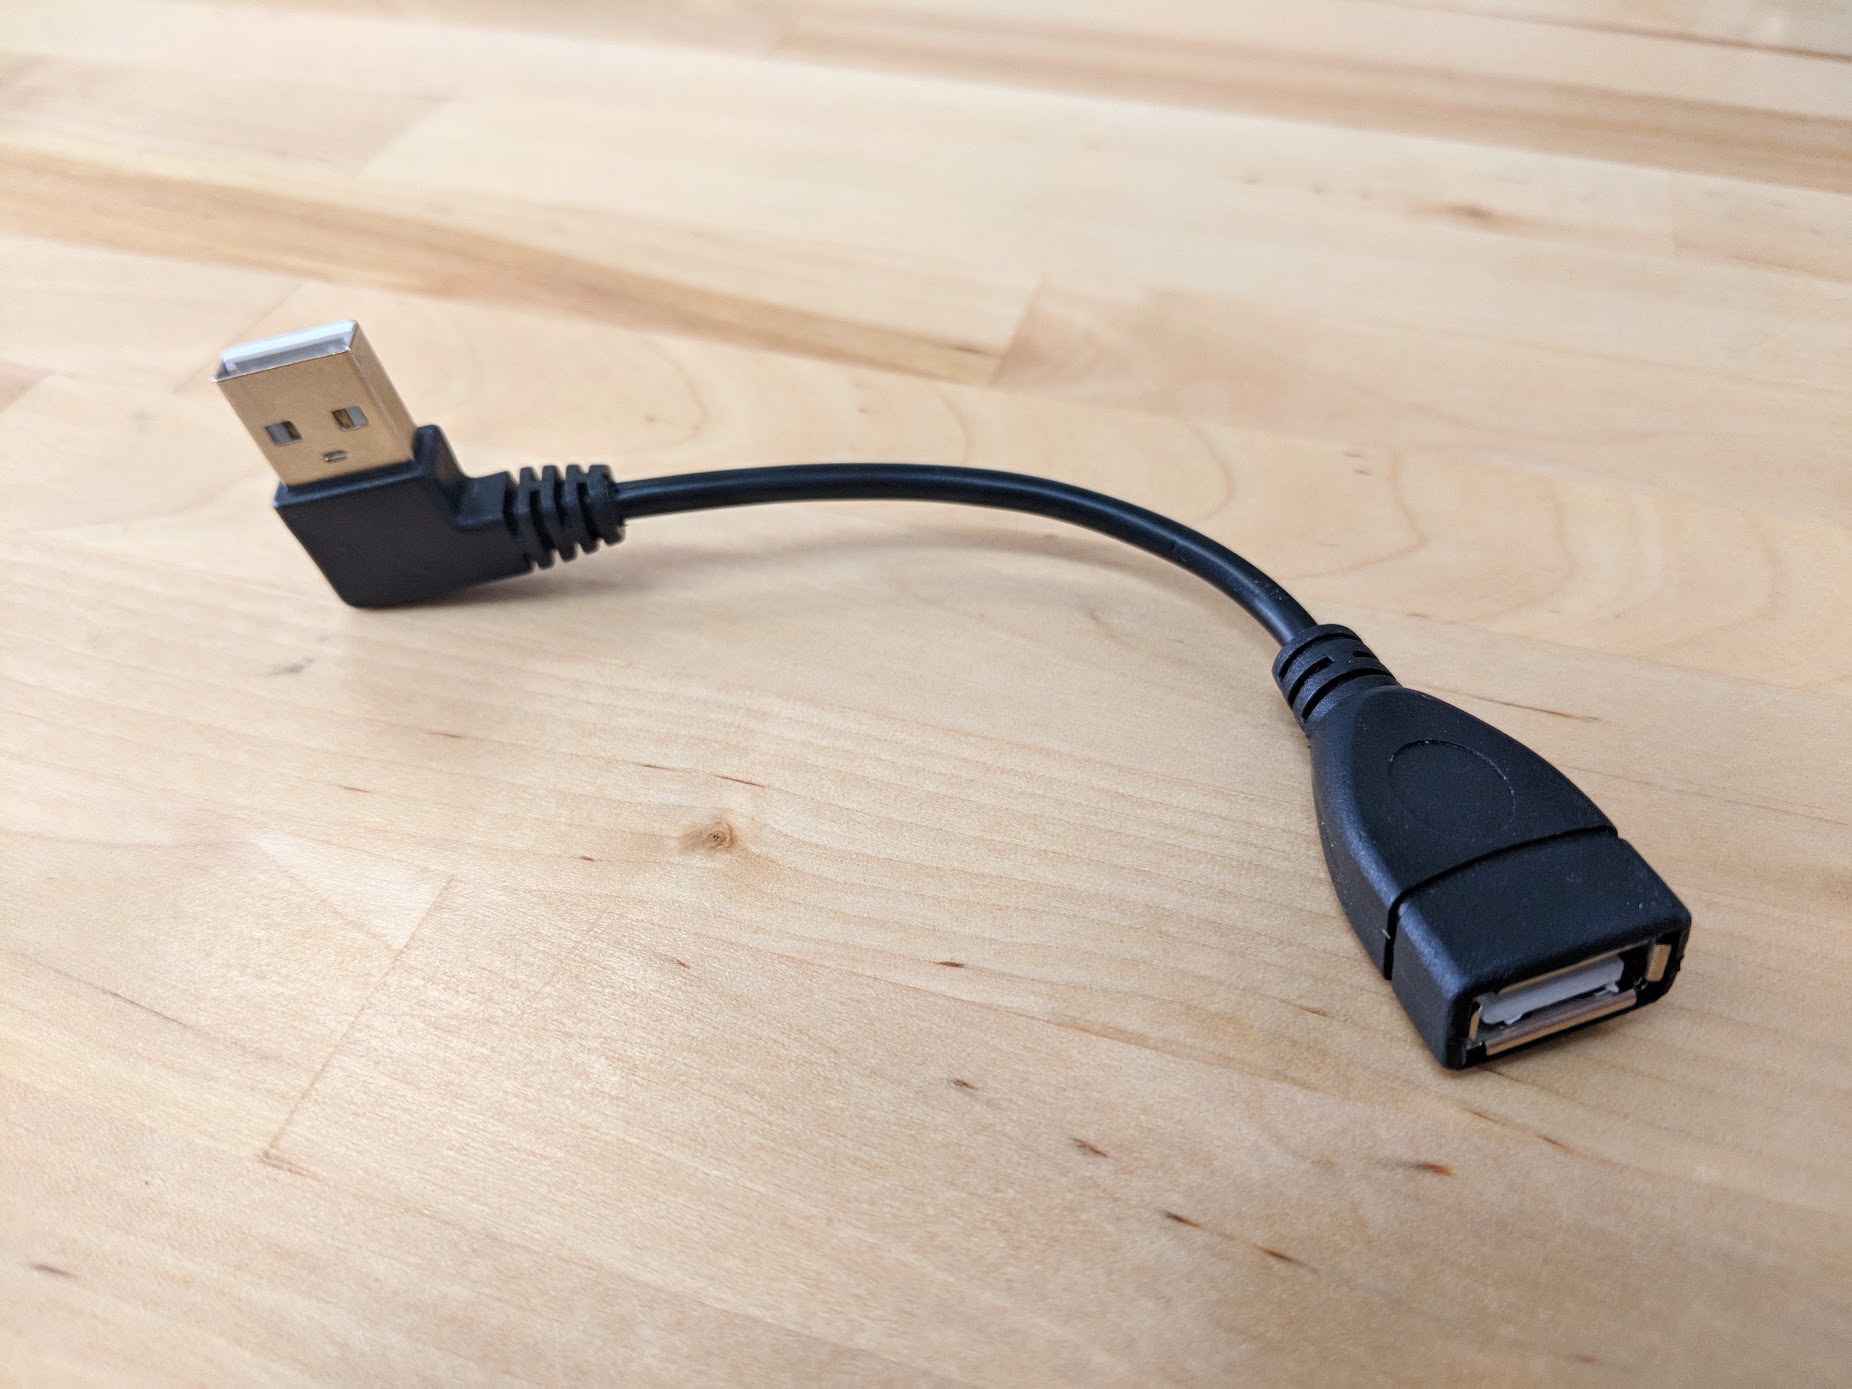 USB Adapter Cable.jpg